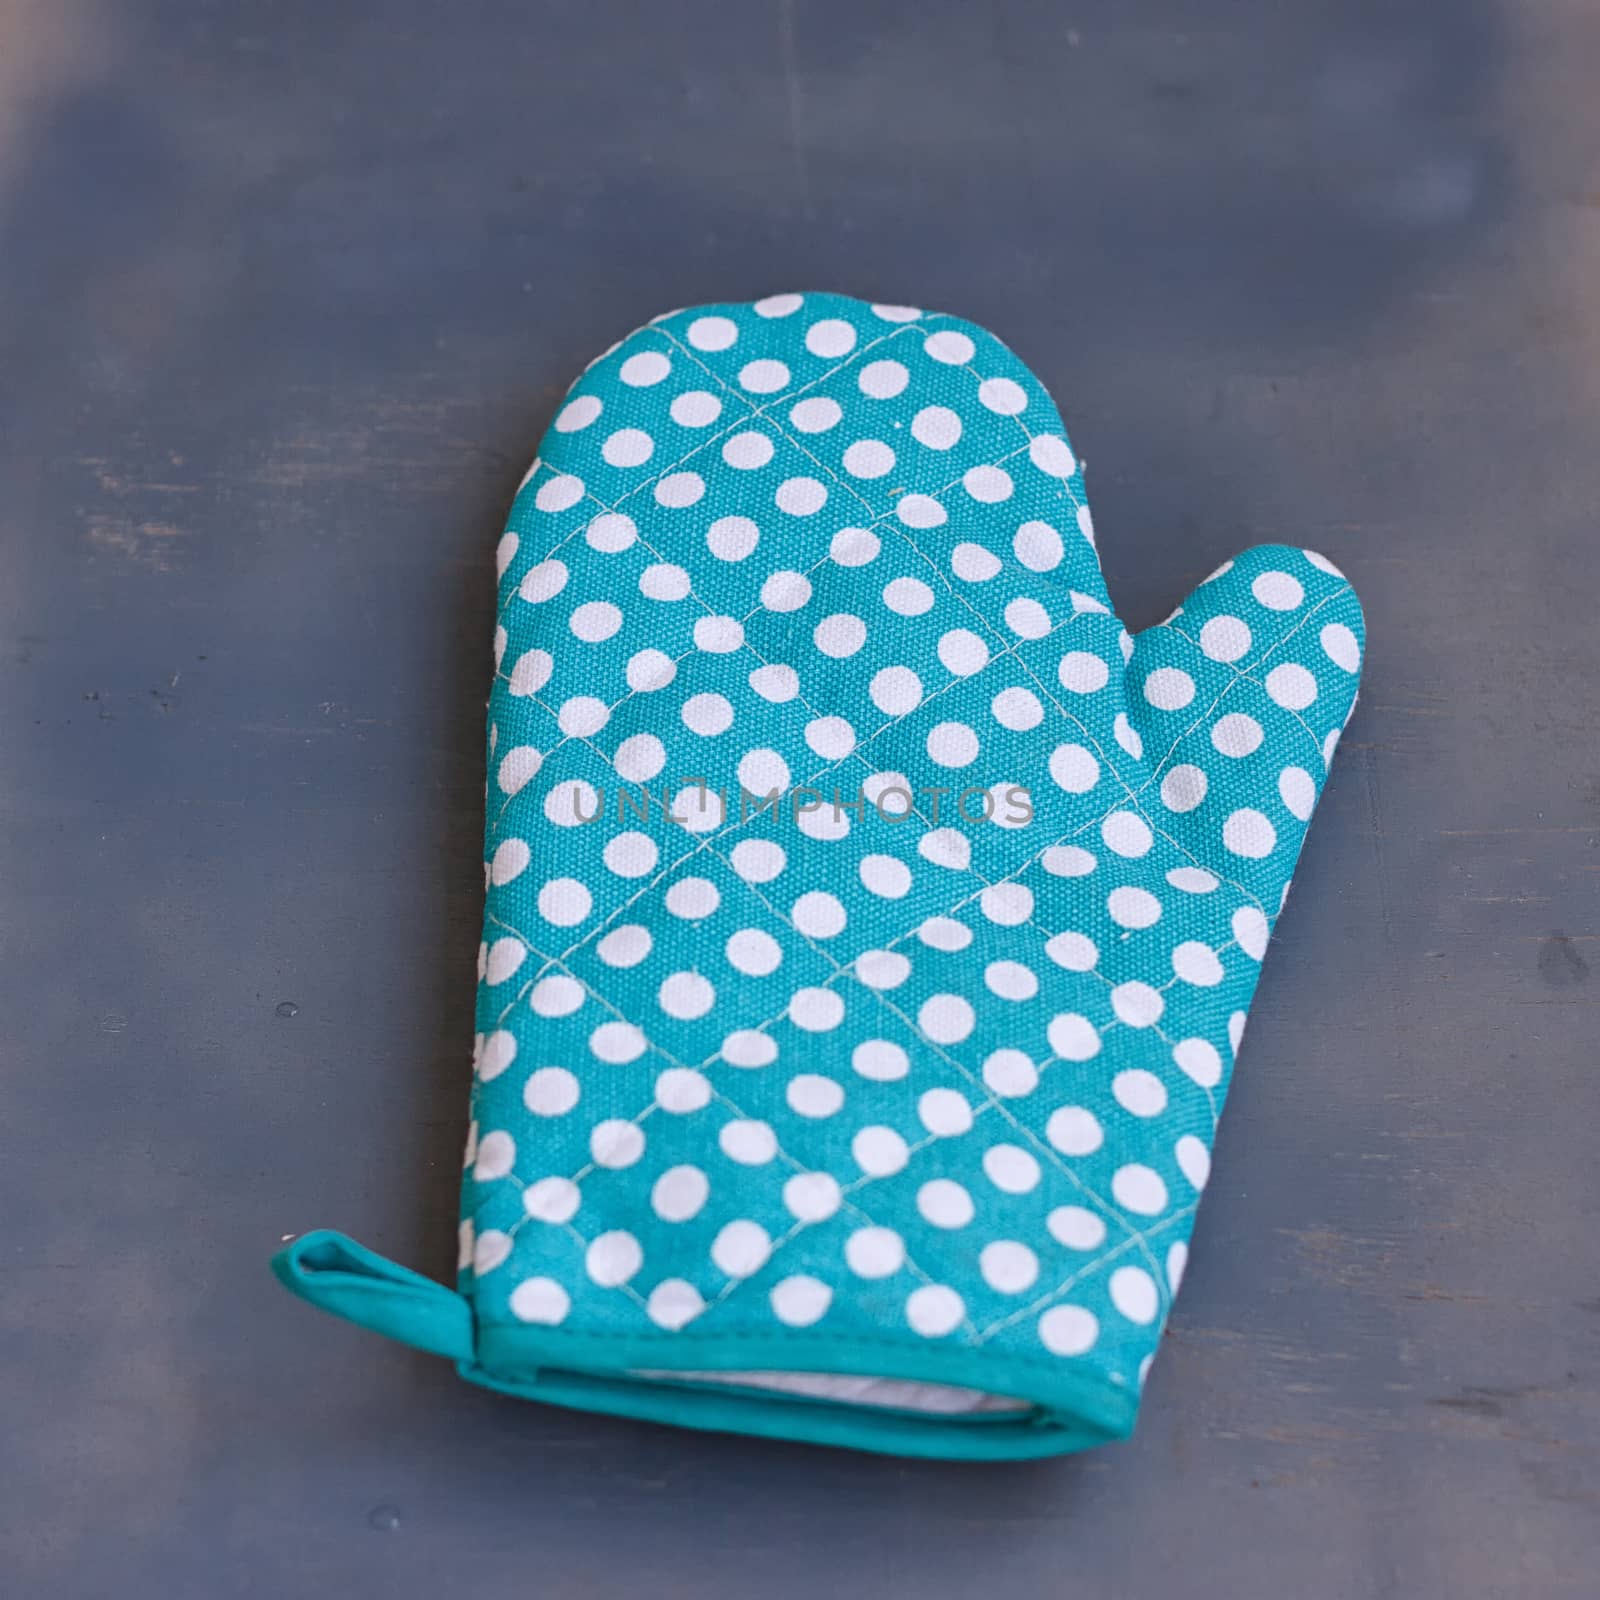 Oven mitt -glove or potholder on the wooden background. by victosha